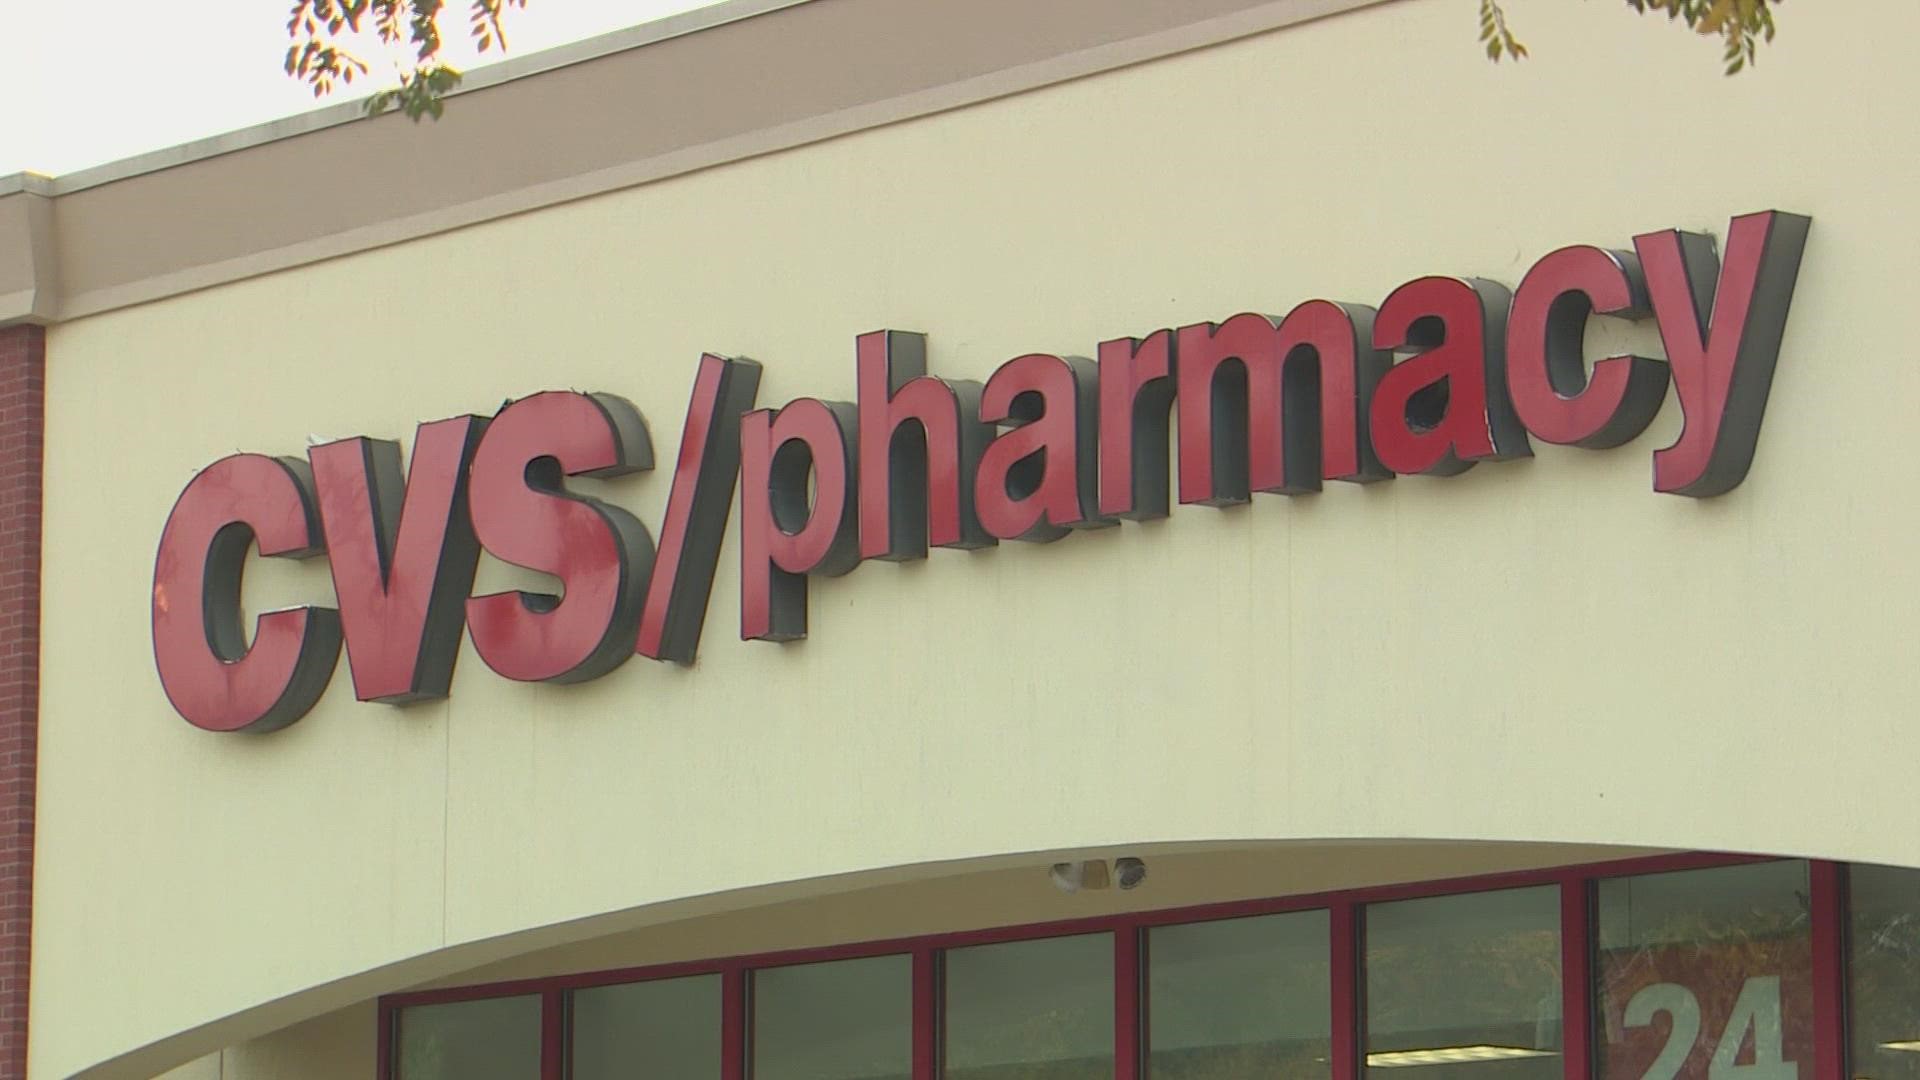 CVS Pharmacy announced it will be closing 900 of its retail stores over the next three years. We're taking a look at why these stores may be shutting down.